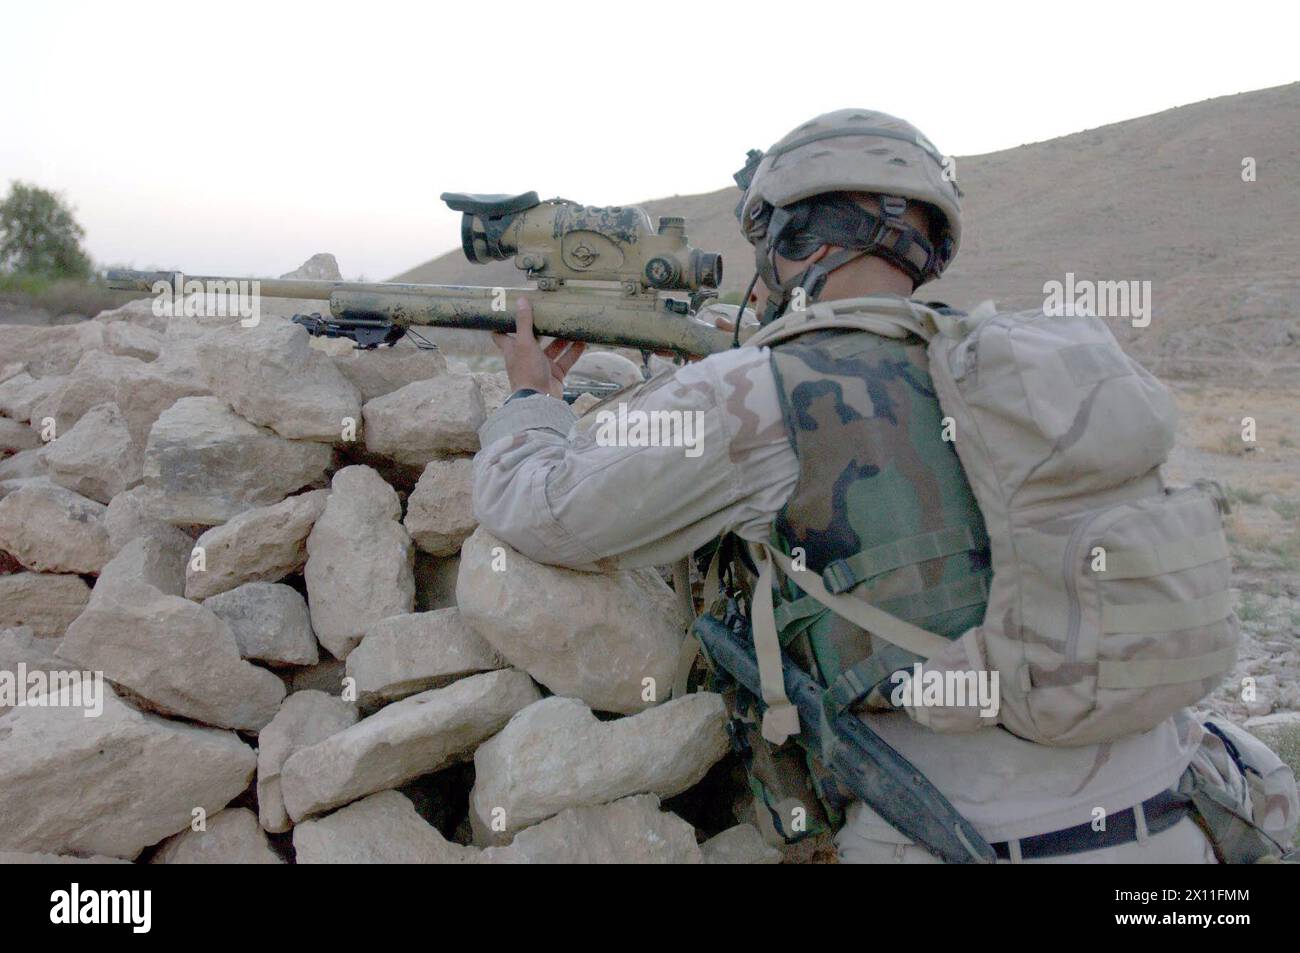 Spc. John Shore prepares to engage the enemy in Avgani, Iraq, Aug. 2, 2004. Shore is a sniper with Company B, 5th Battalion, 20th Infantry Regiment, 3rd Brigade, 2nd Infantry Division (Stryker Brigade Combat Team). Stock Photo